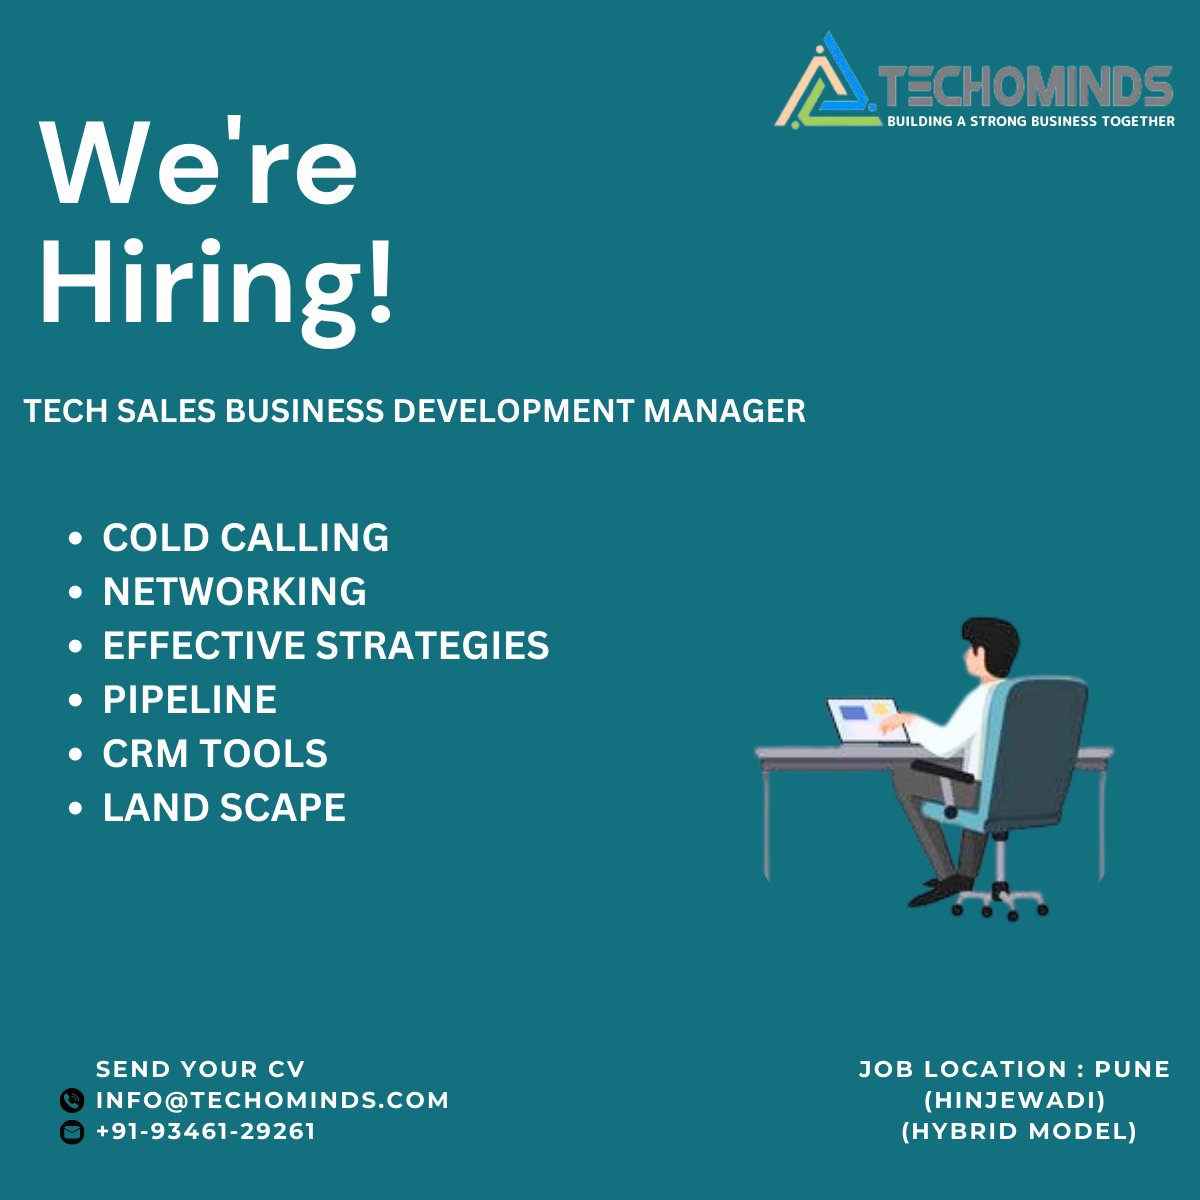 We are Hiring Tech Sales Business Development Manager..!!
.
.
.
#hiring #coldcalling #networking #effectivestrategies #pipeline #crmtools #landscape